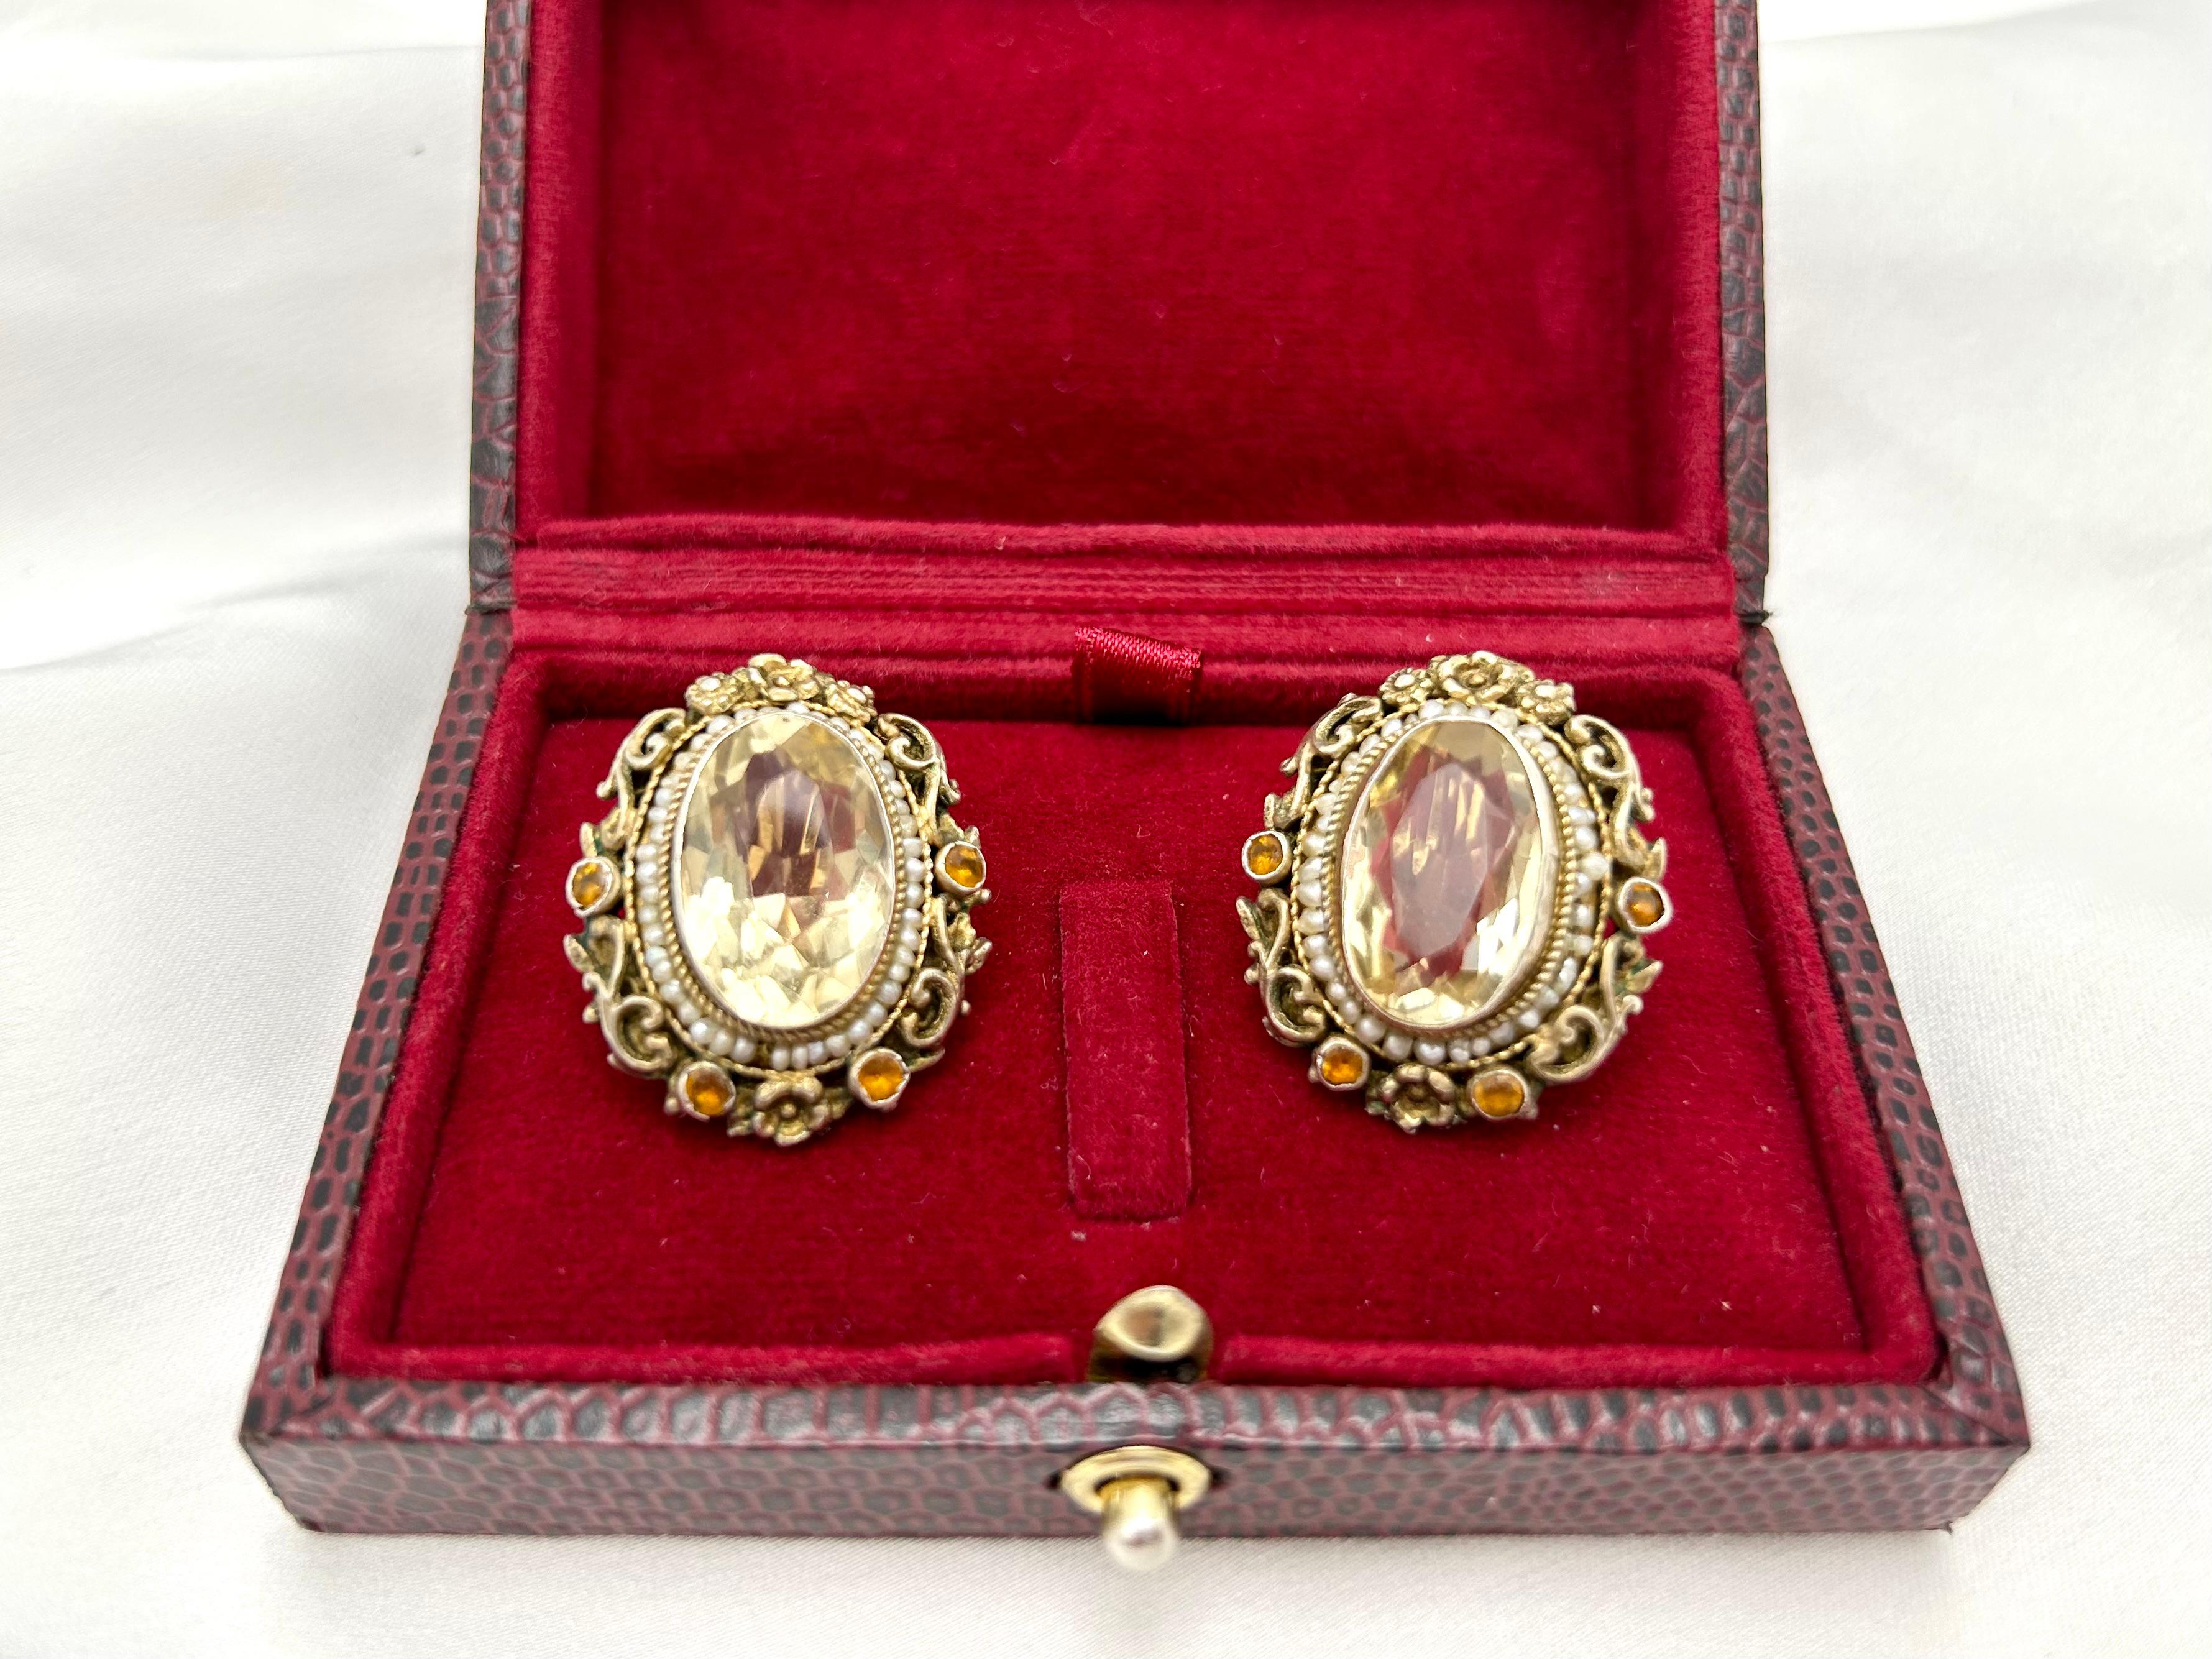 Oval Cut Antique silver earrings with citrines, garnets and pearls, circa 1900. For Sale